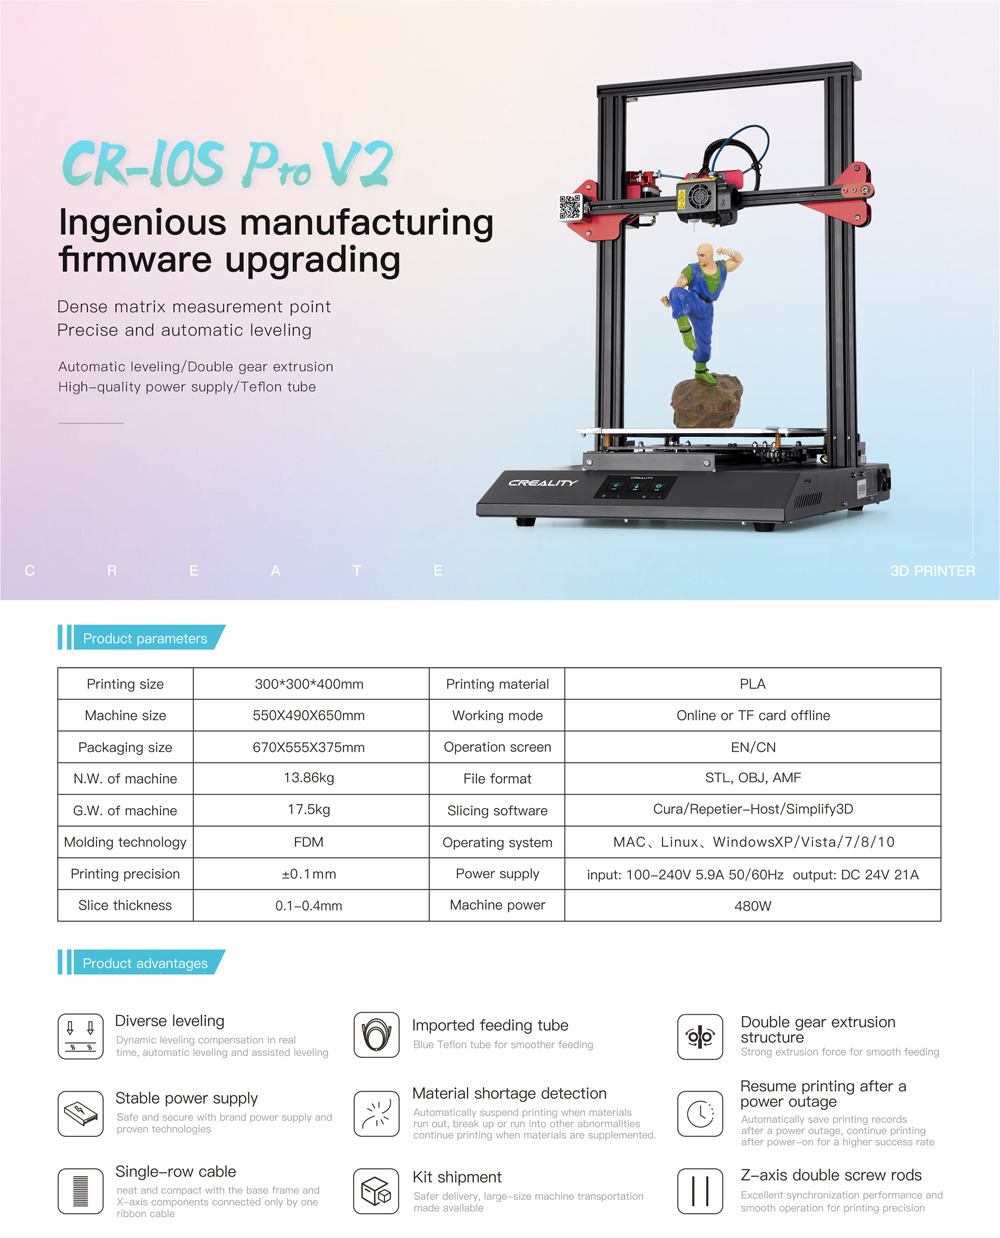 Creality 3D® CR-10S Pro V2 Firmware Upgrading DIY 3D Printer Kit 300*300*400 Print Size With Auto Leveling/Dual Gear Extrusion/ResumePrint/Colorful Touch Screen